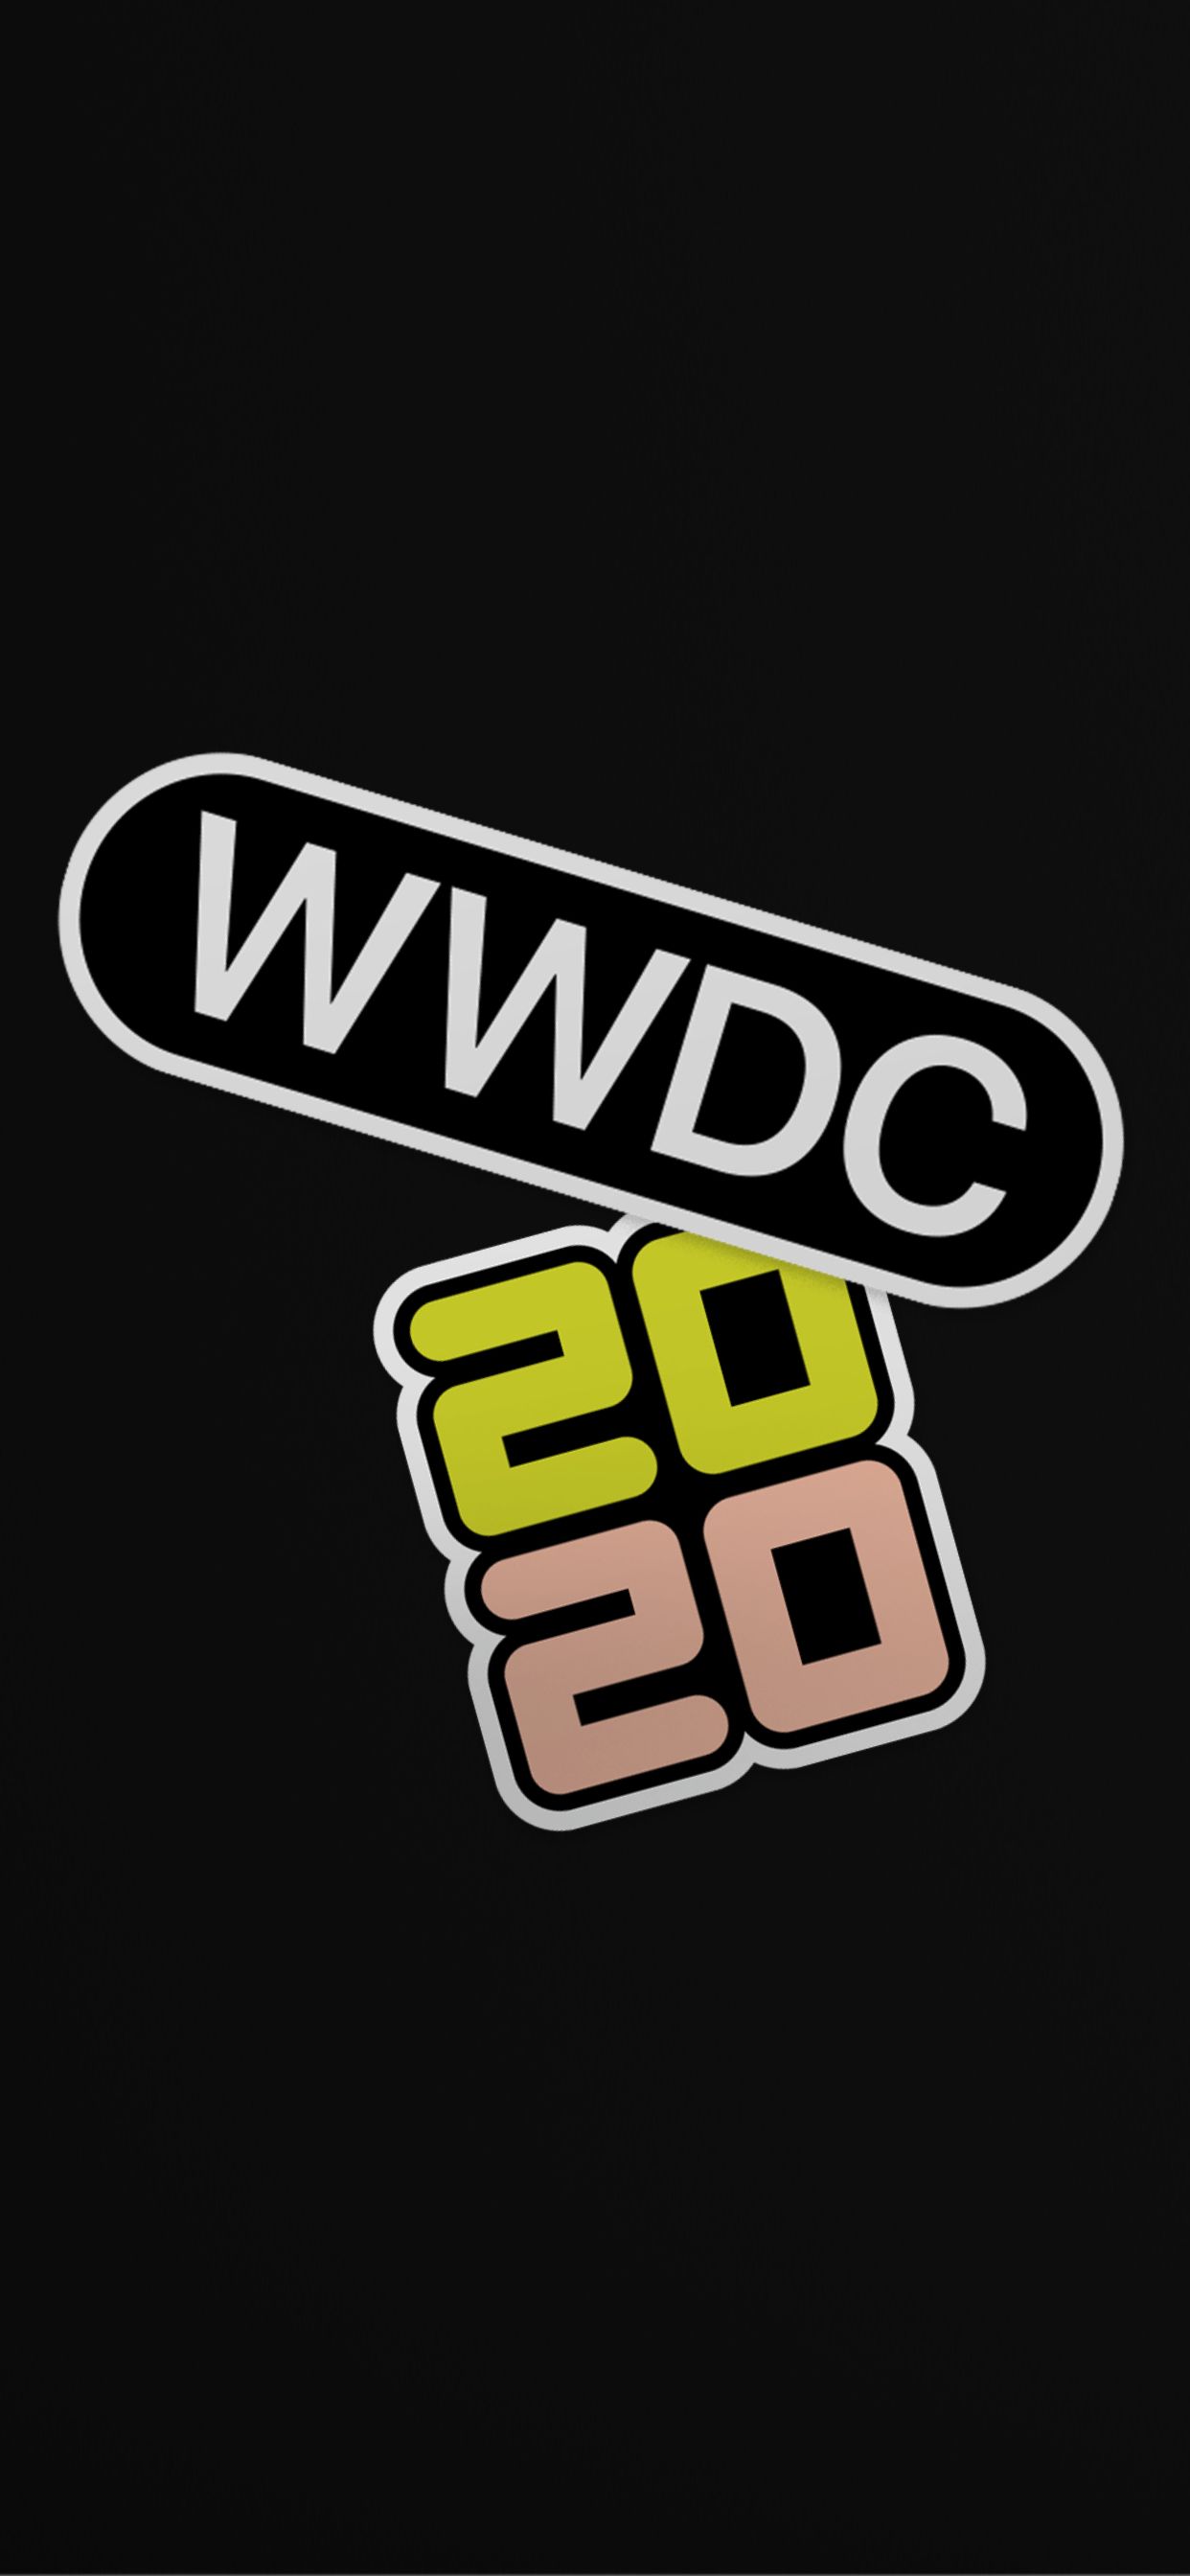 WWDC 2020 wallpaper for iPhone and iPad